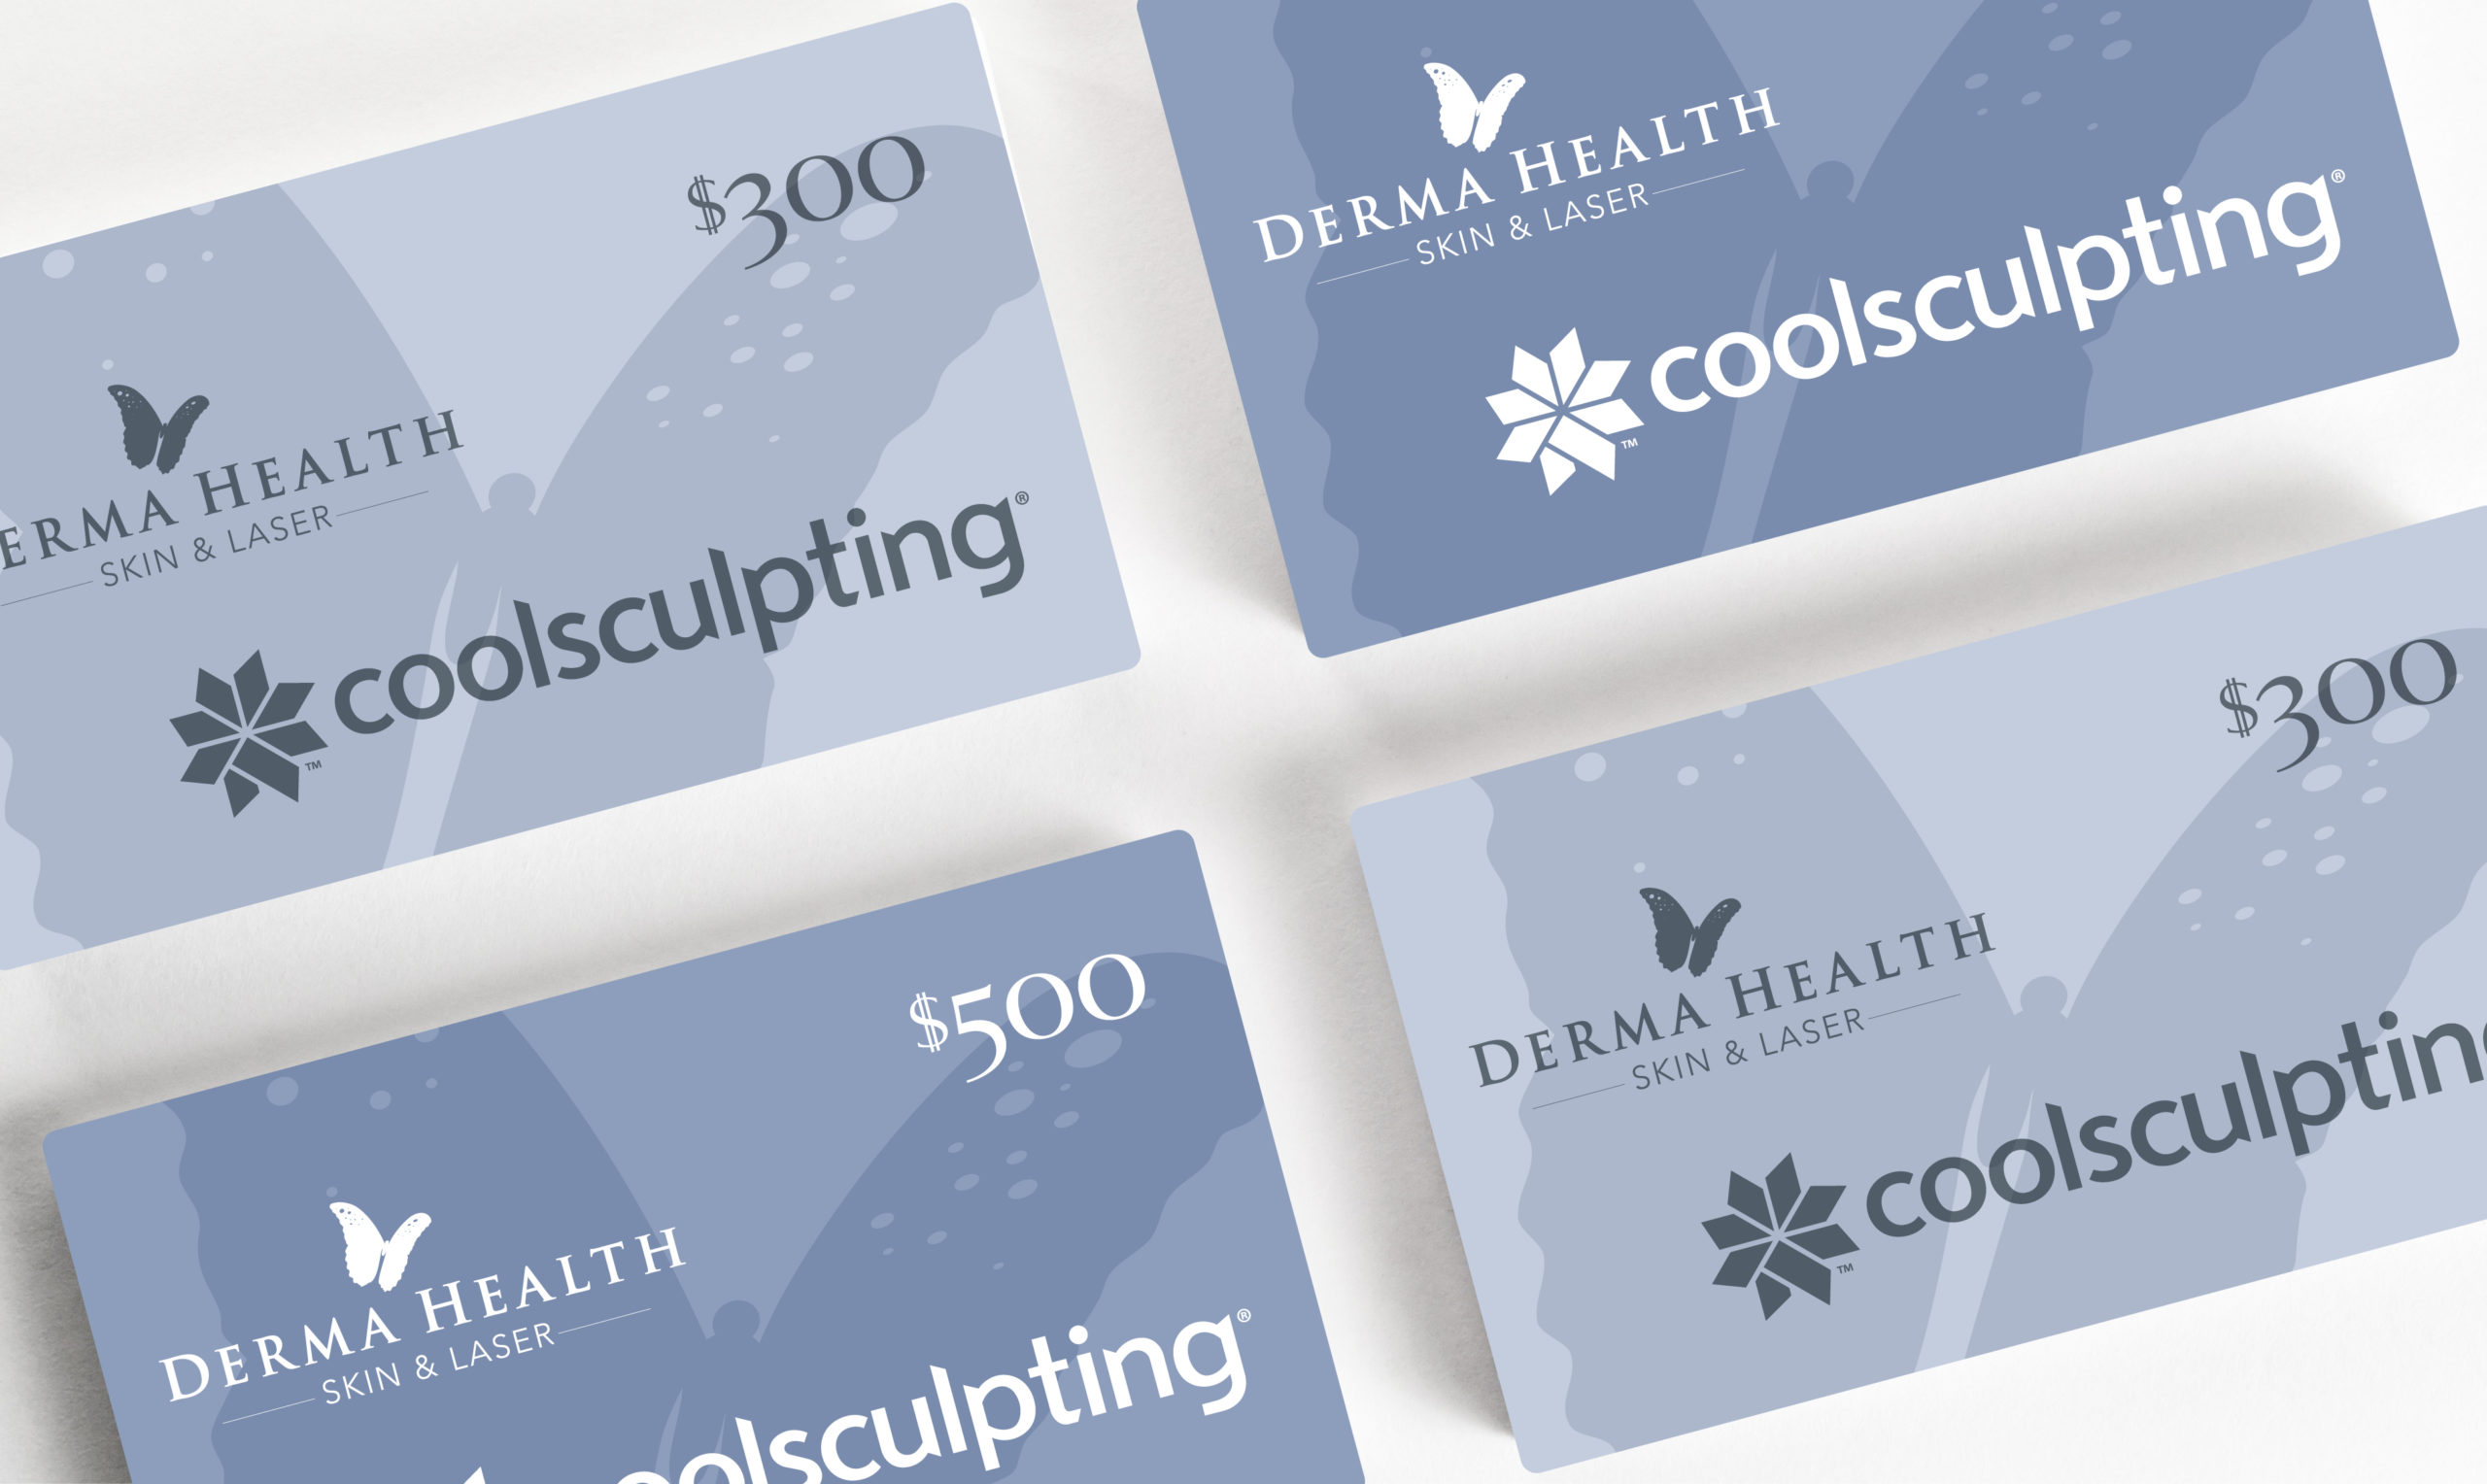 DermaHealth_Shopify_GiftCard_CoolSculpting_Graphic